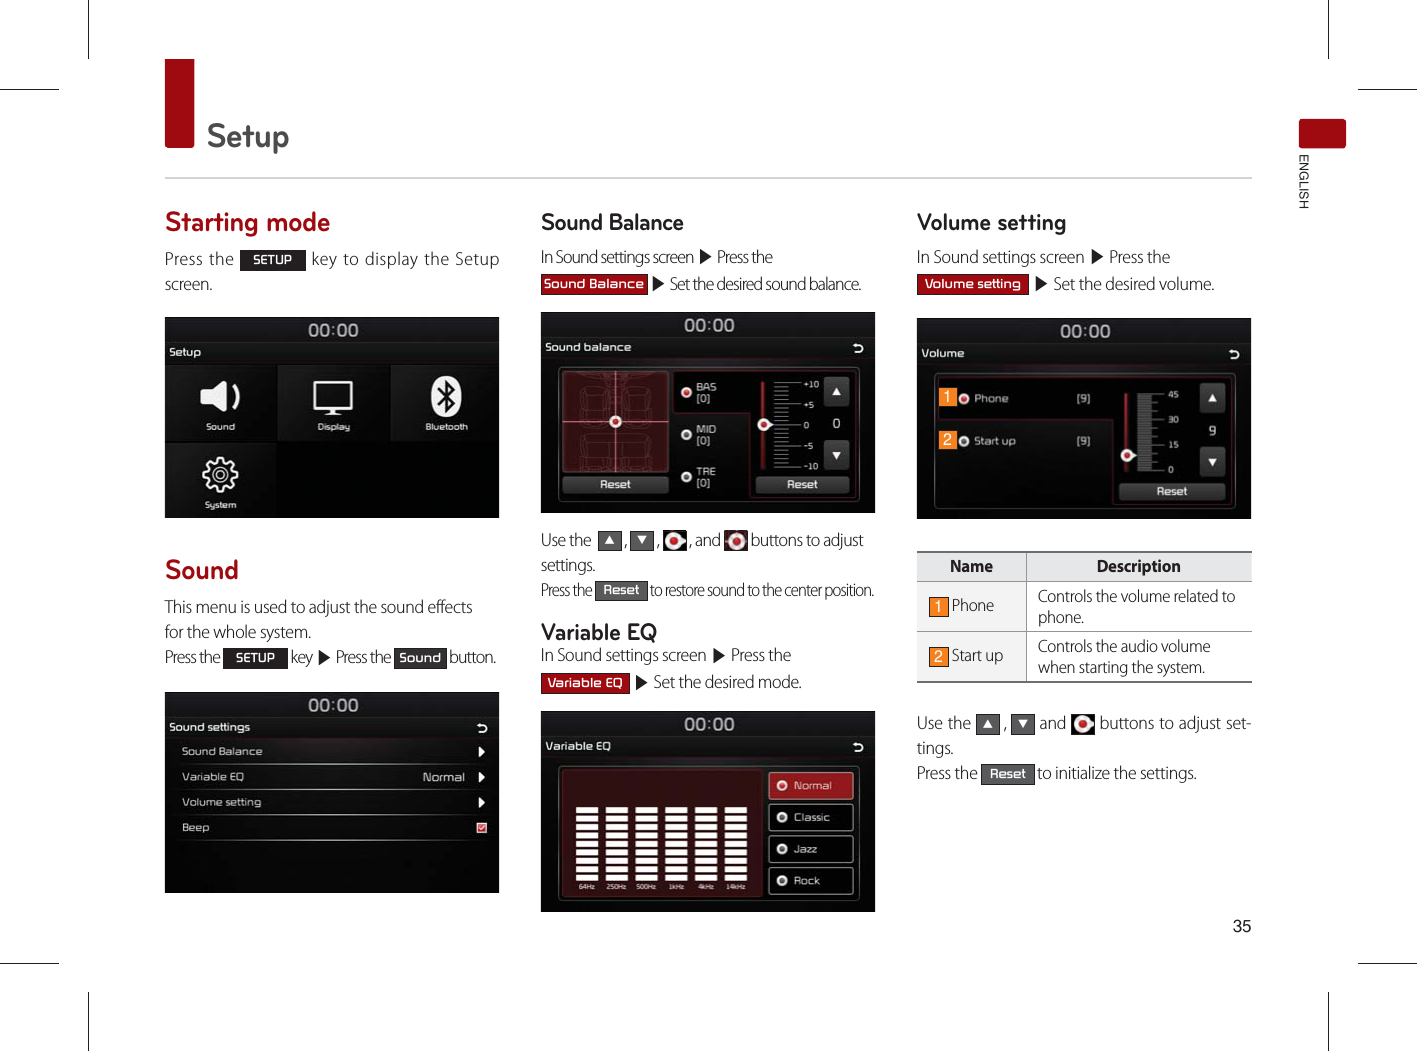 SetupENGLISHStarting modePress the 6(783 key to display the Setup screen.SoundThis menu is used to adjust the sound effectsfor the whole system.Press the 6(783 key ▶ Press the 6RXQG button.Sound BalanceIn Sound settings screen ▶ Press the 6RXQG%DODQFH ▶ Set the desired sound balance.Use the  ԟ , ԣ ,   , and   buttons to adjust settings. Press the 5HVHW to restore sound to the center position.Variable EQIn Sound settings screen ▶ Press the 9DULDEOH(4 ▶ Set the desired mode. Volume setting In Sound settings screen ▶ Press the 9ROXPHVHWWLQJ ▶ Set the desired volume.Name Description1 Phone Controls the volume related tophone.2 Start up Controls the audio volumewhen starting the system.Use the ԟ , ԣ and   buttons to adjust set-tings. Press the 5HVHW to initialize the settings.12